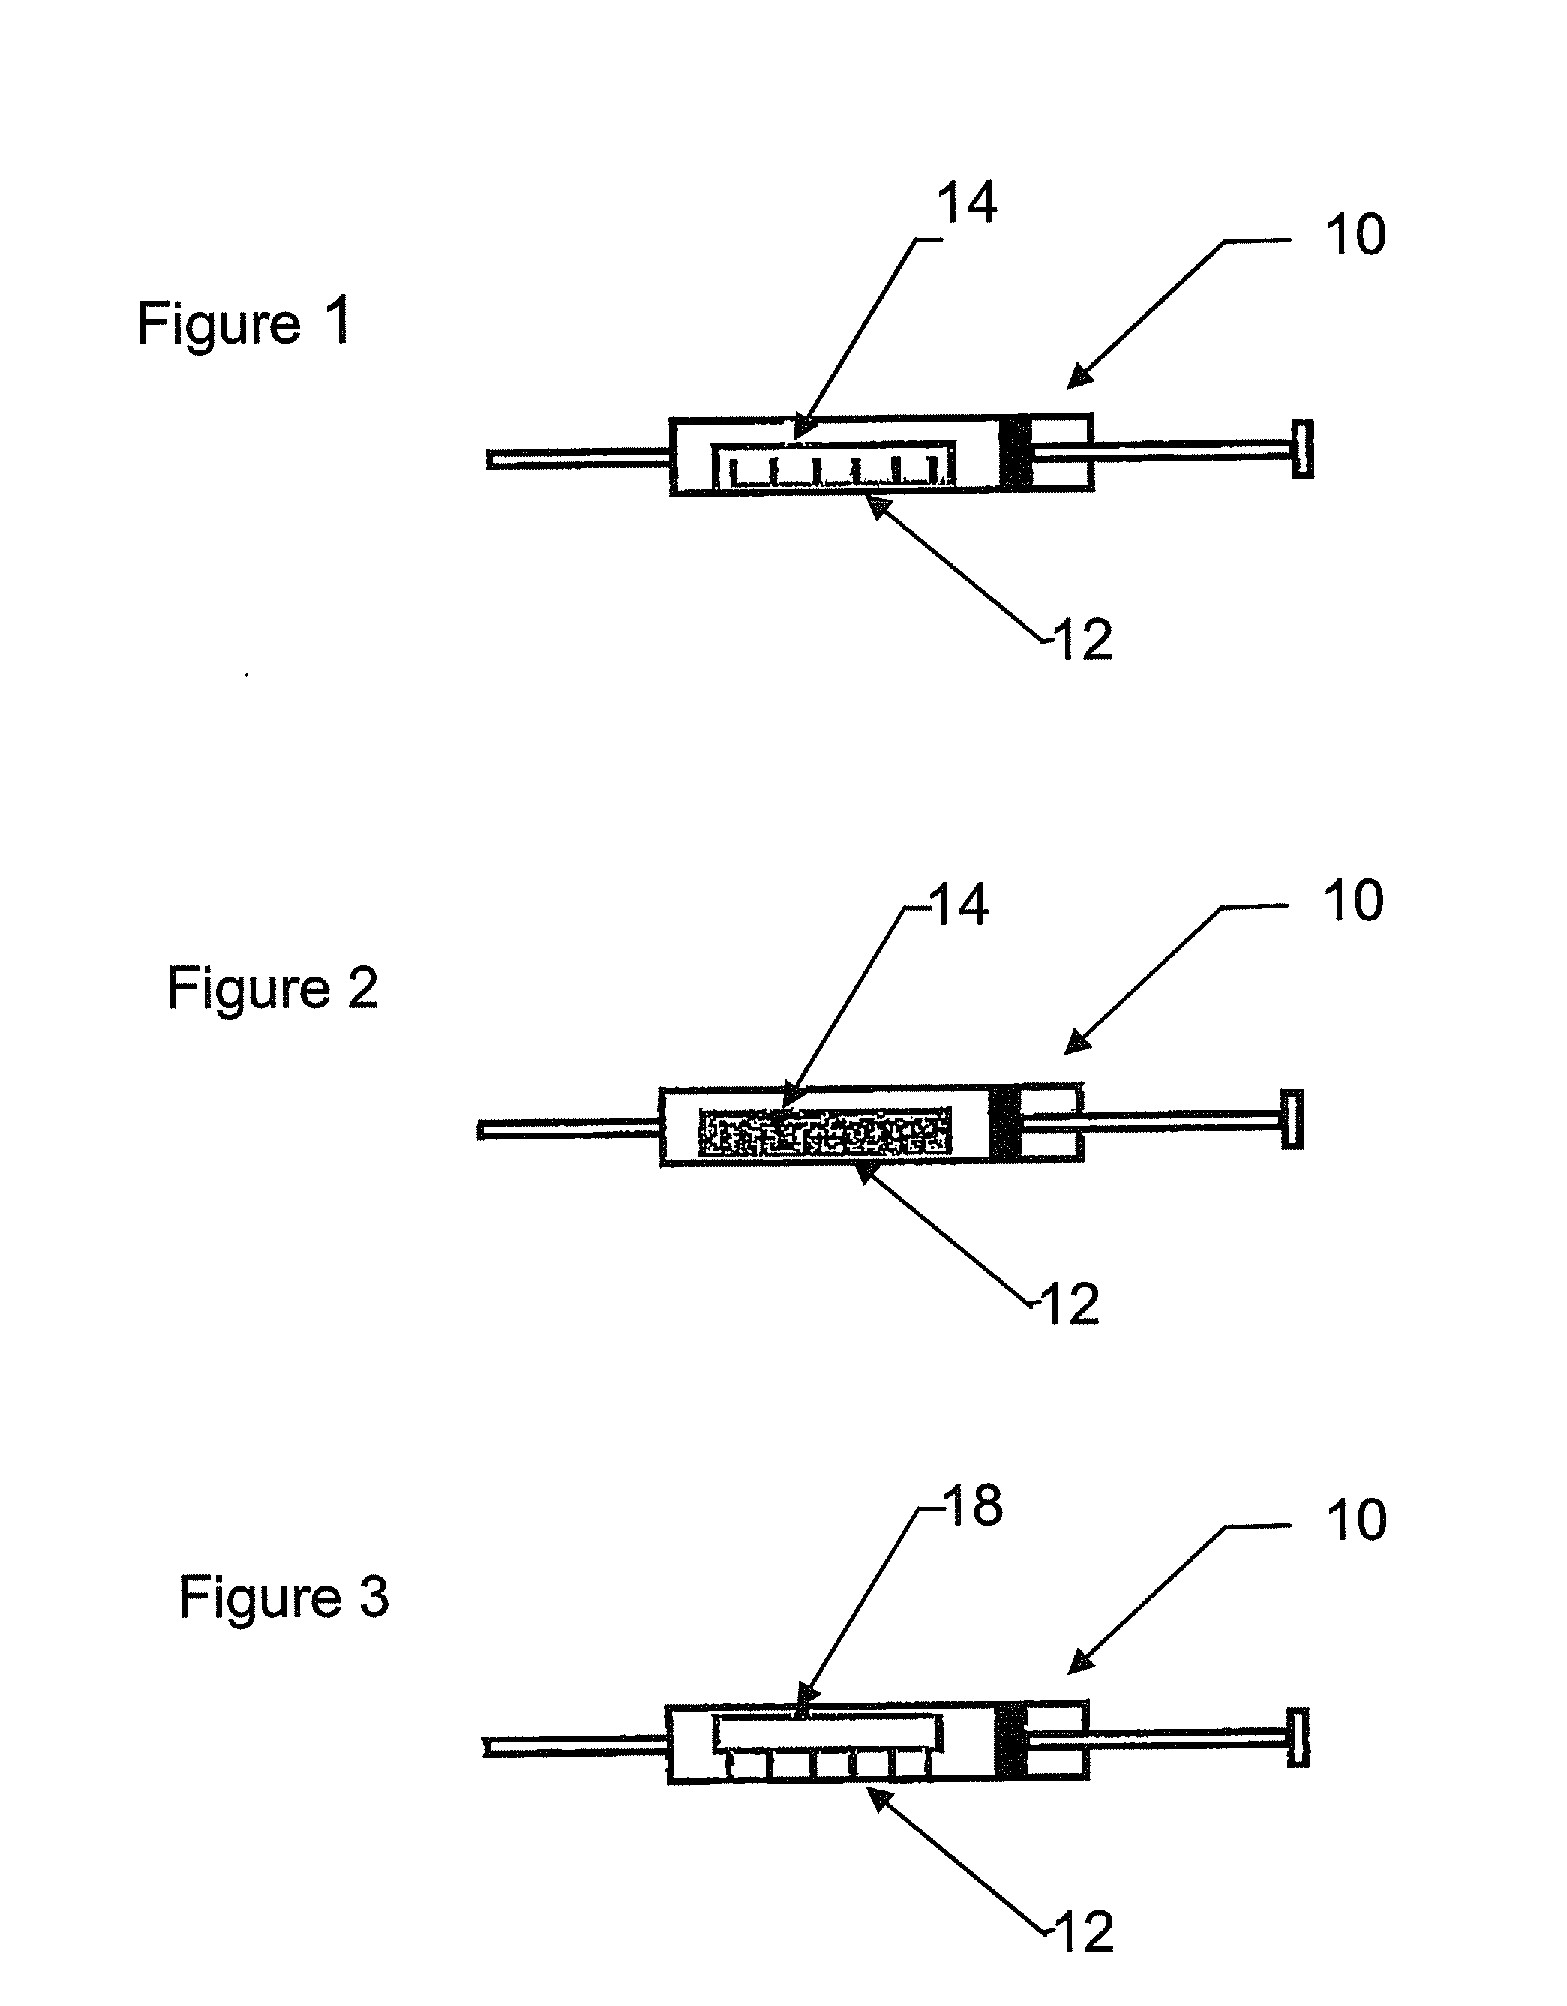 Apparatus with timed color change indication